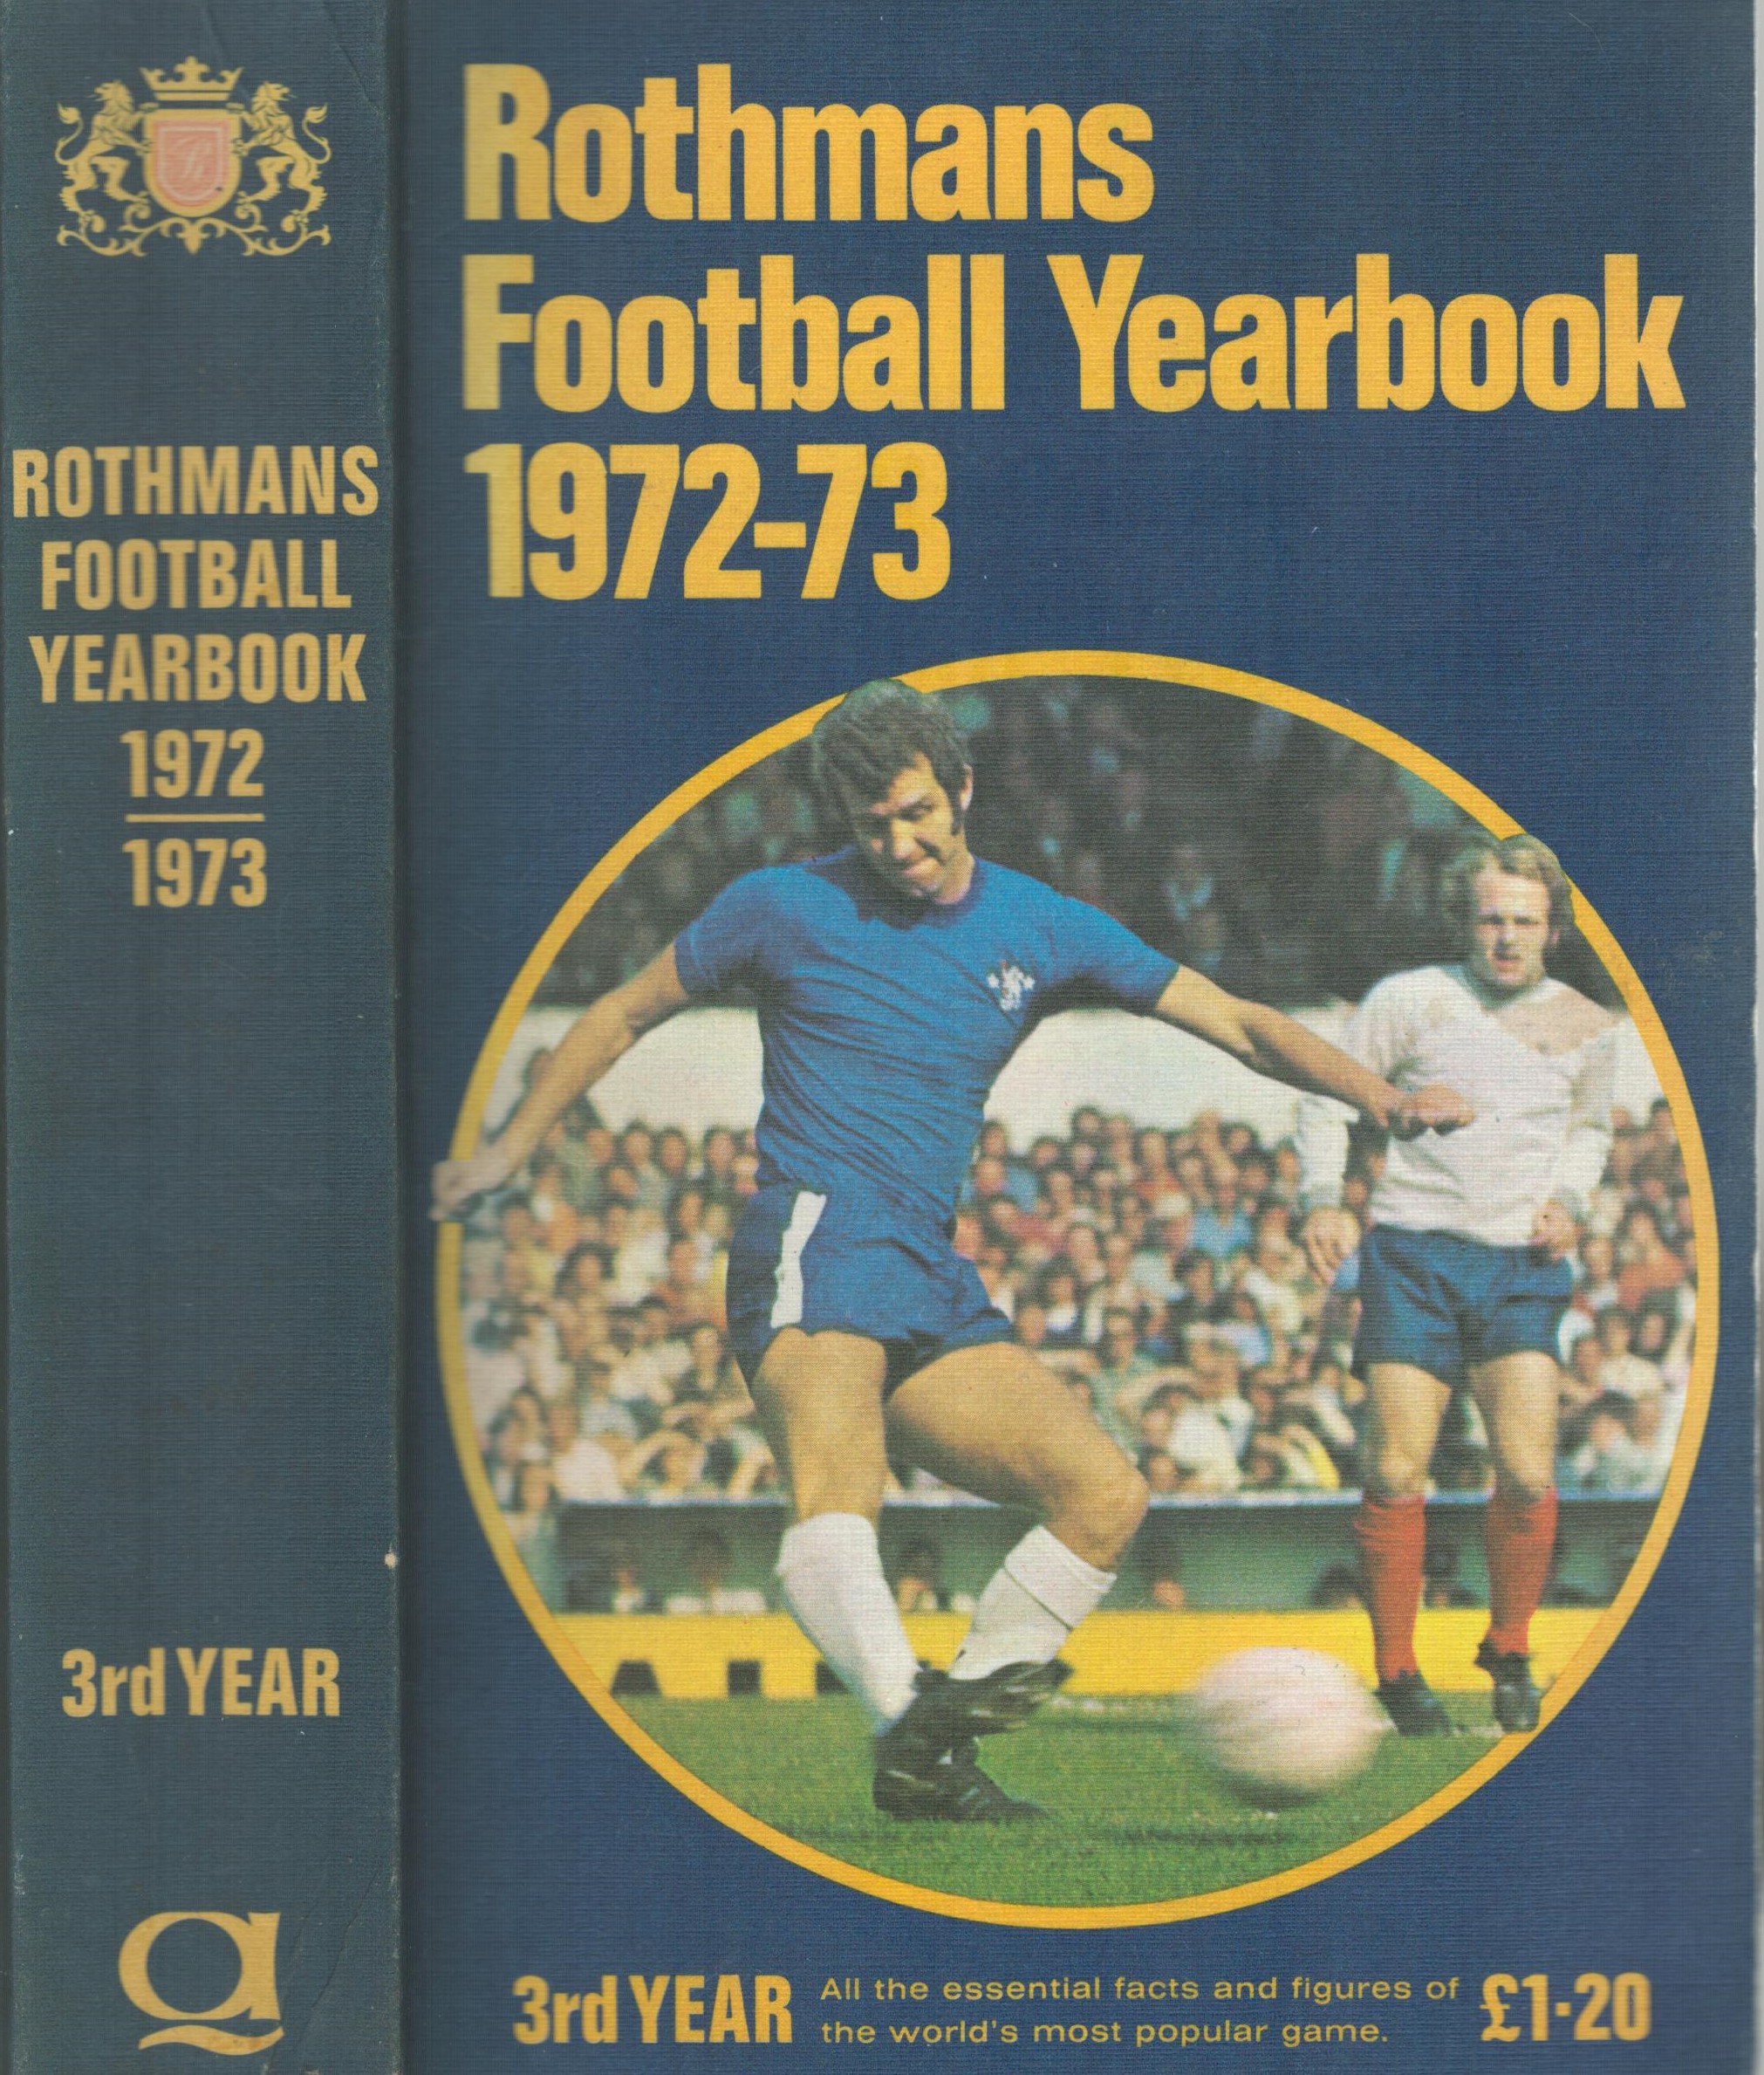 Football, Rothmans Football Yearbook collection Original 1st, 2nd, 3rd and 4th year editions of - Image 8 of 13